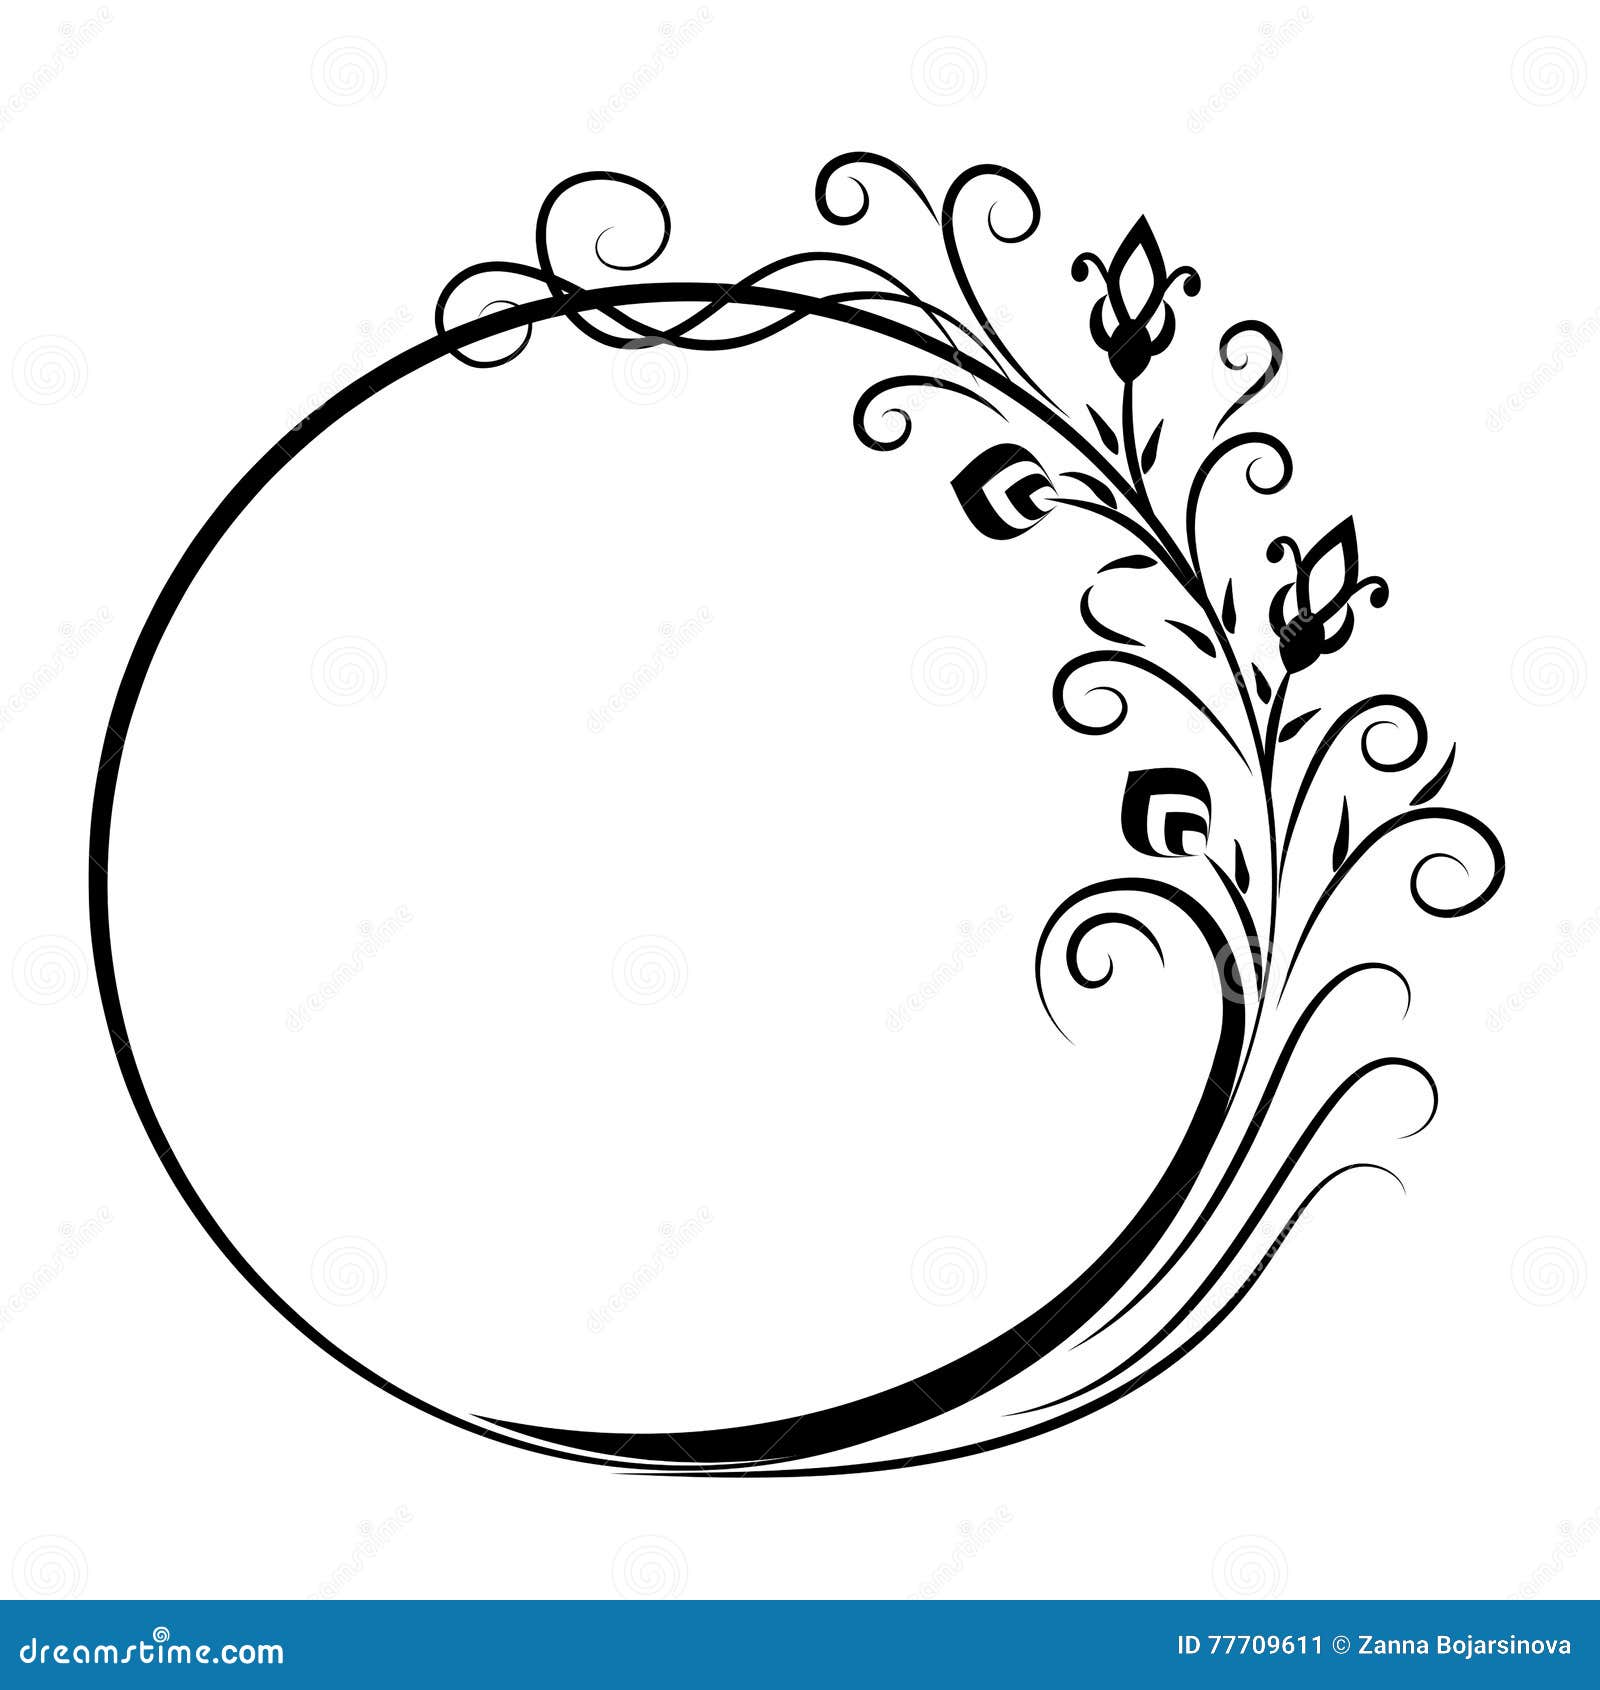 Simple ornate round frame floral design Royalty Free Vector